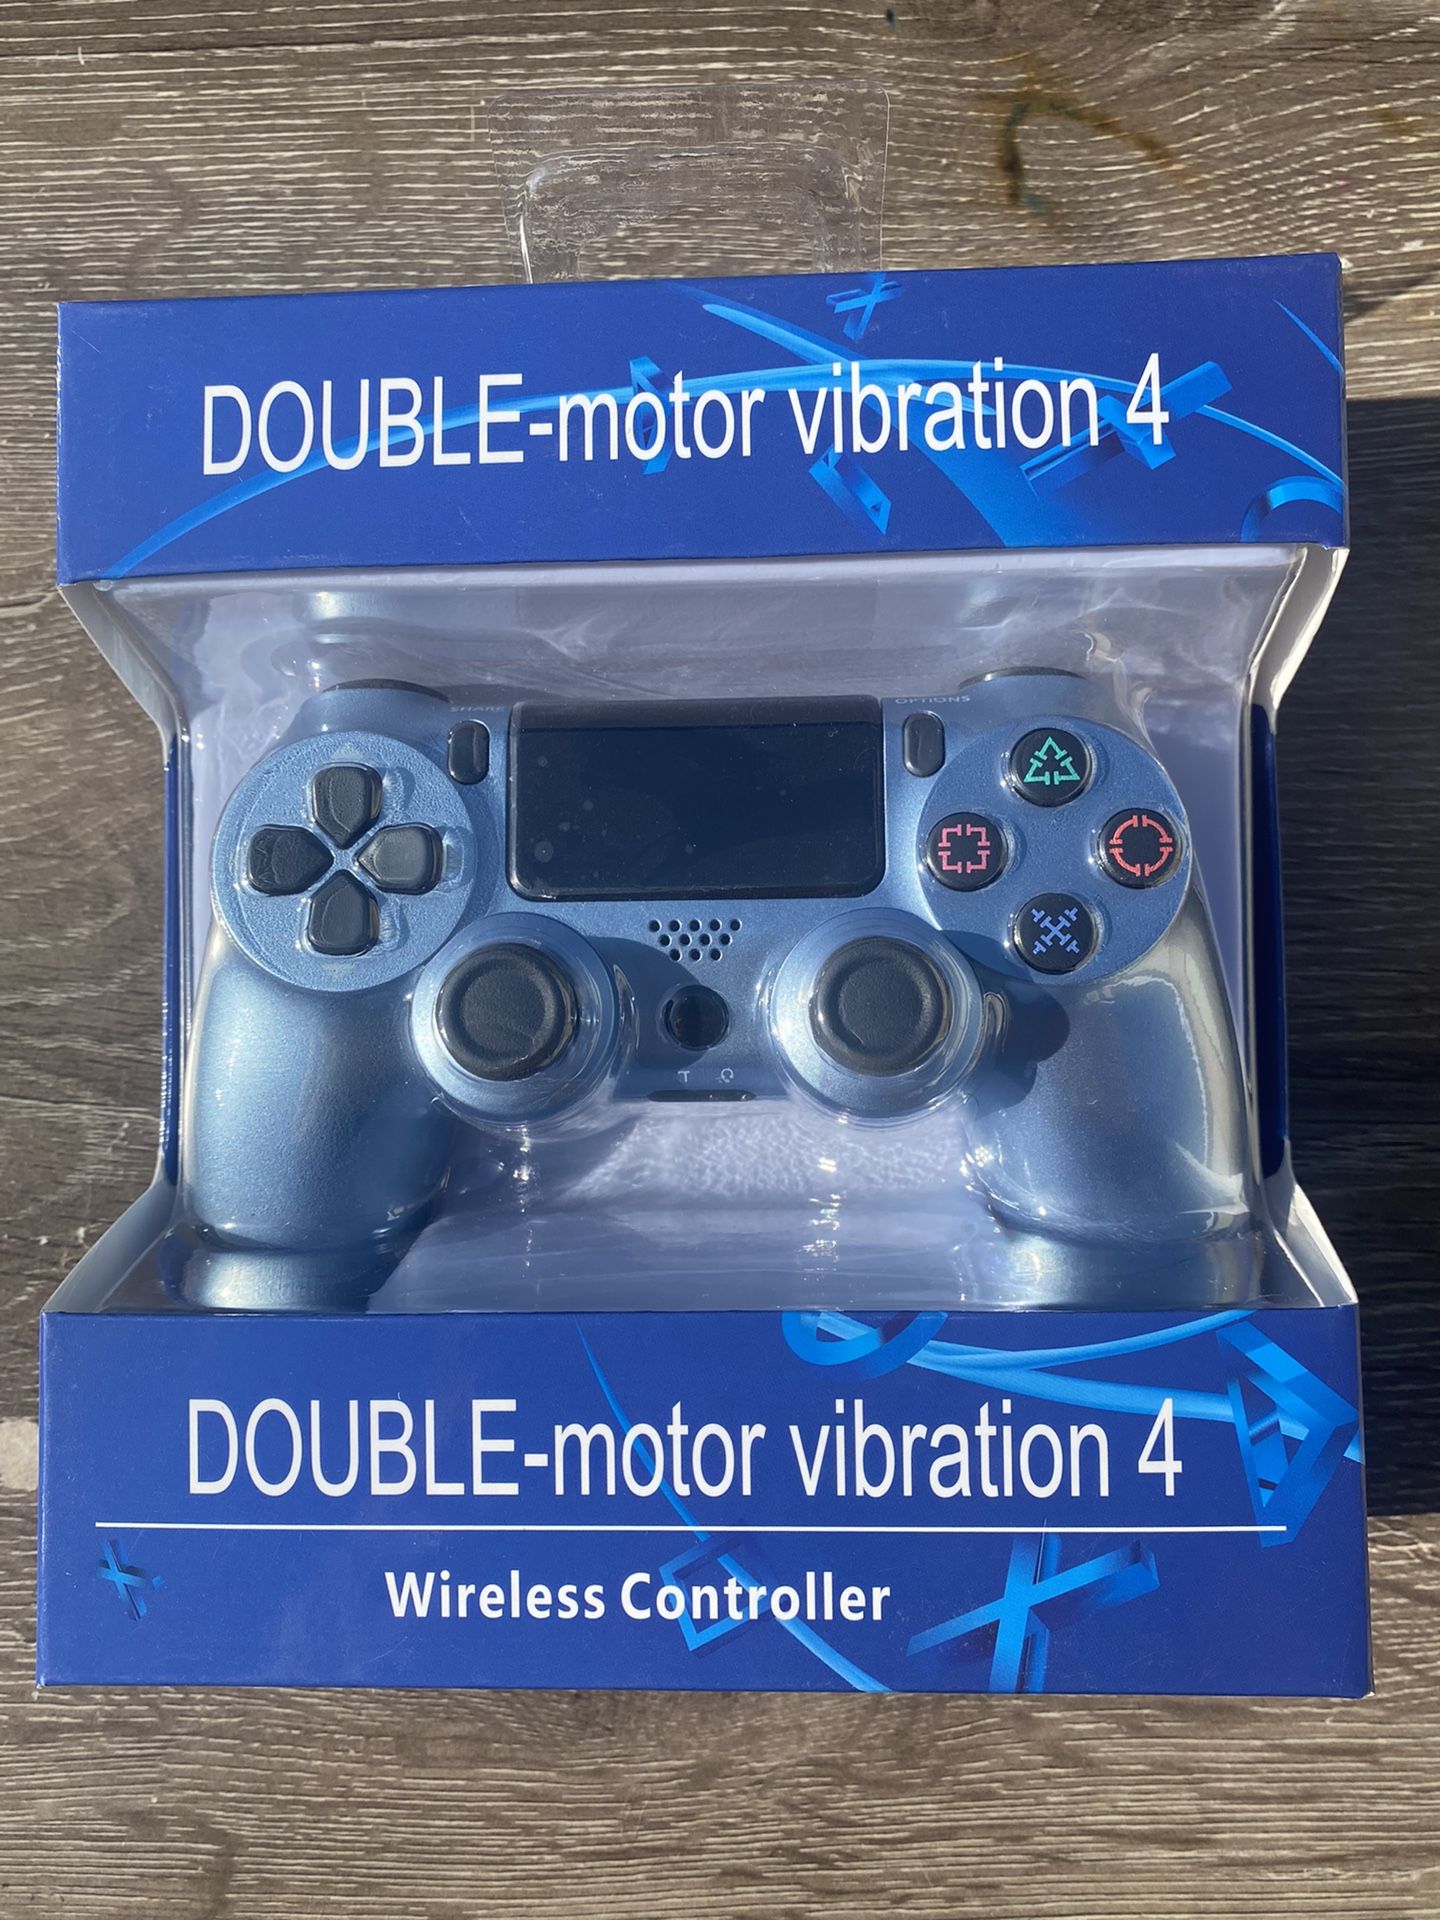 New Non-Brand DualShock Wireless Controllers For PS4